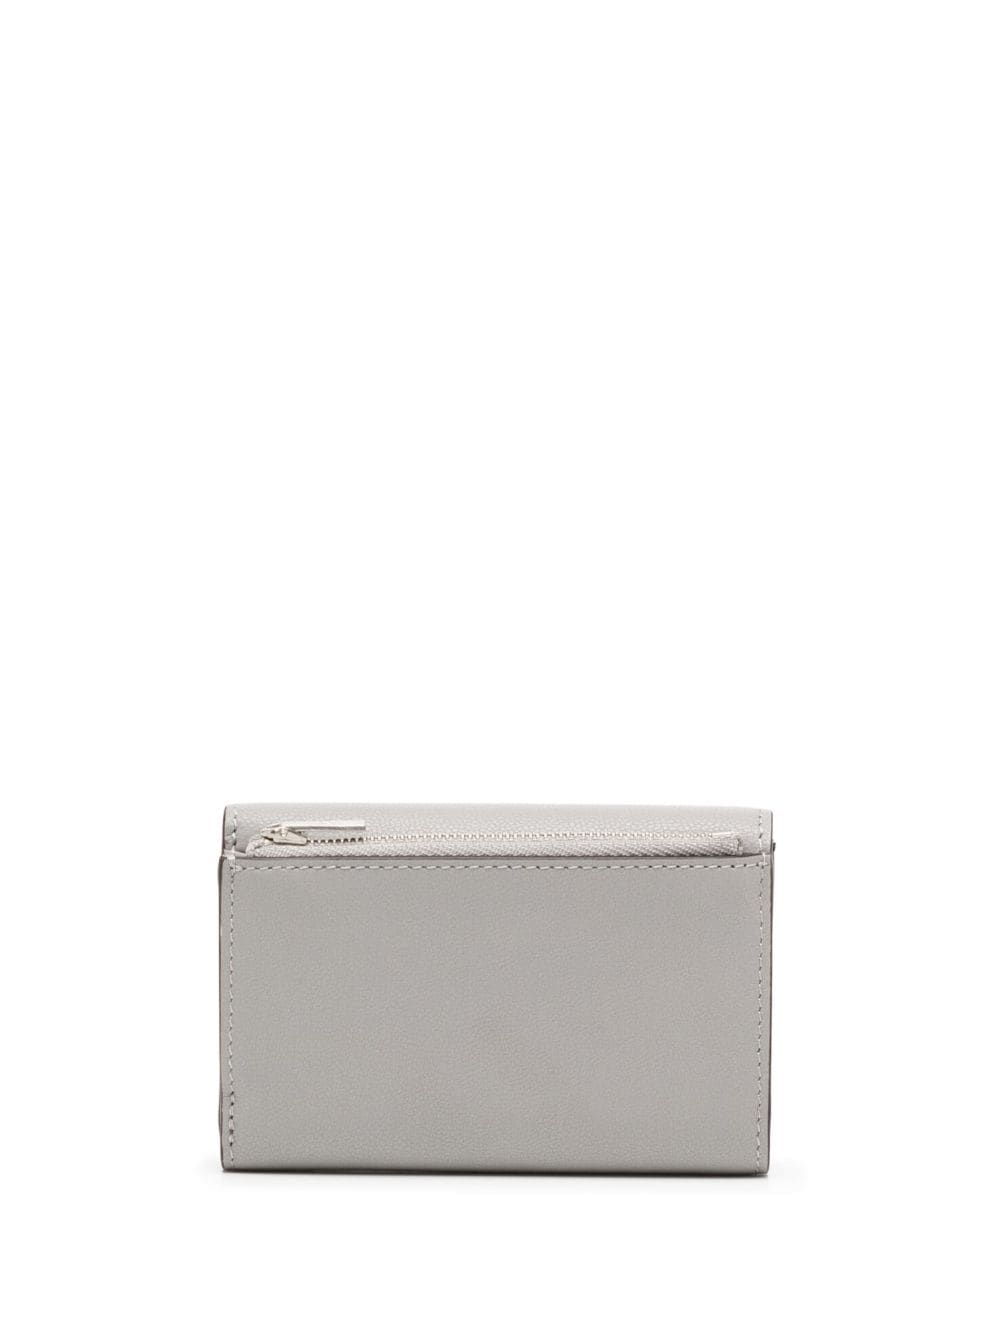 Shop Mulberry Darley Folding Leather Wallet In Grey